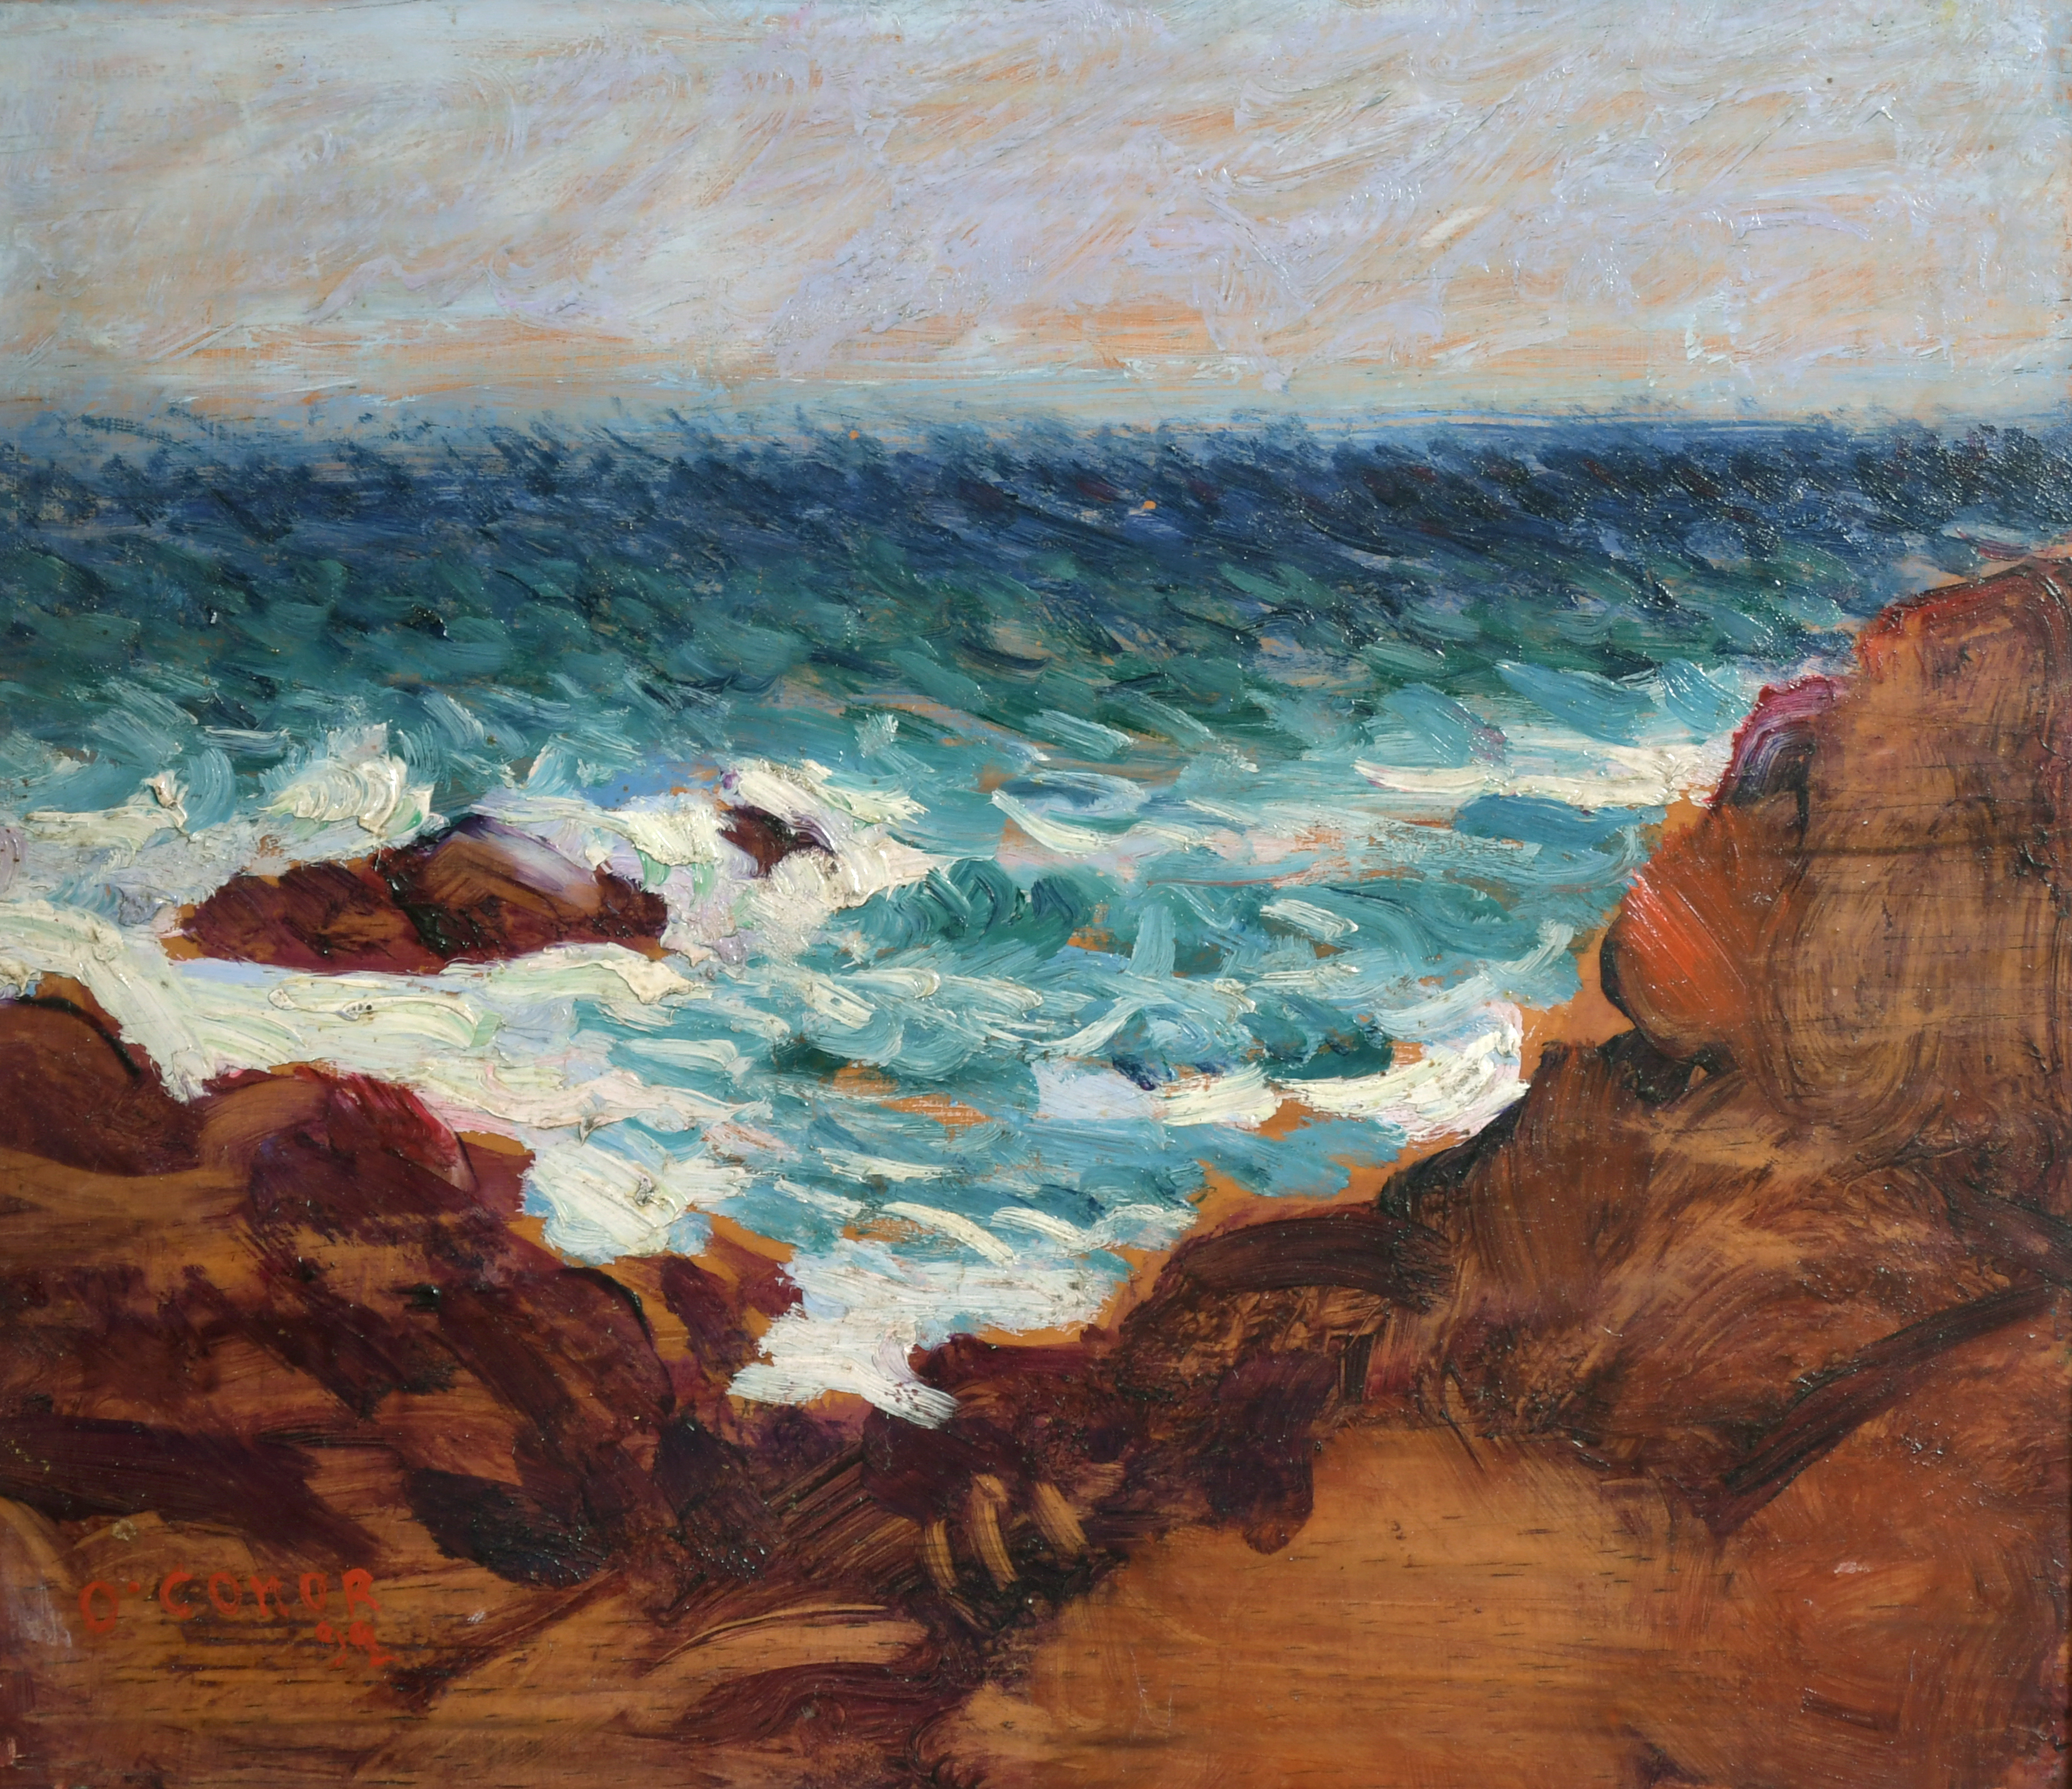 Roderic O'Conor (1860-1940) Irish. "Sea and Red Rocks", Oil on Panel, Signed and Dated '92, and - Image 2 of 5